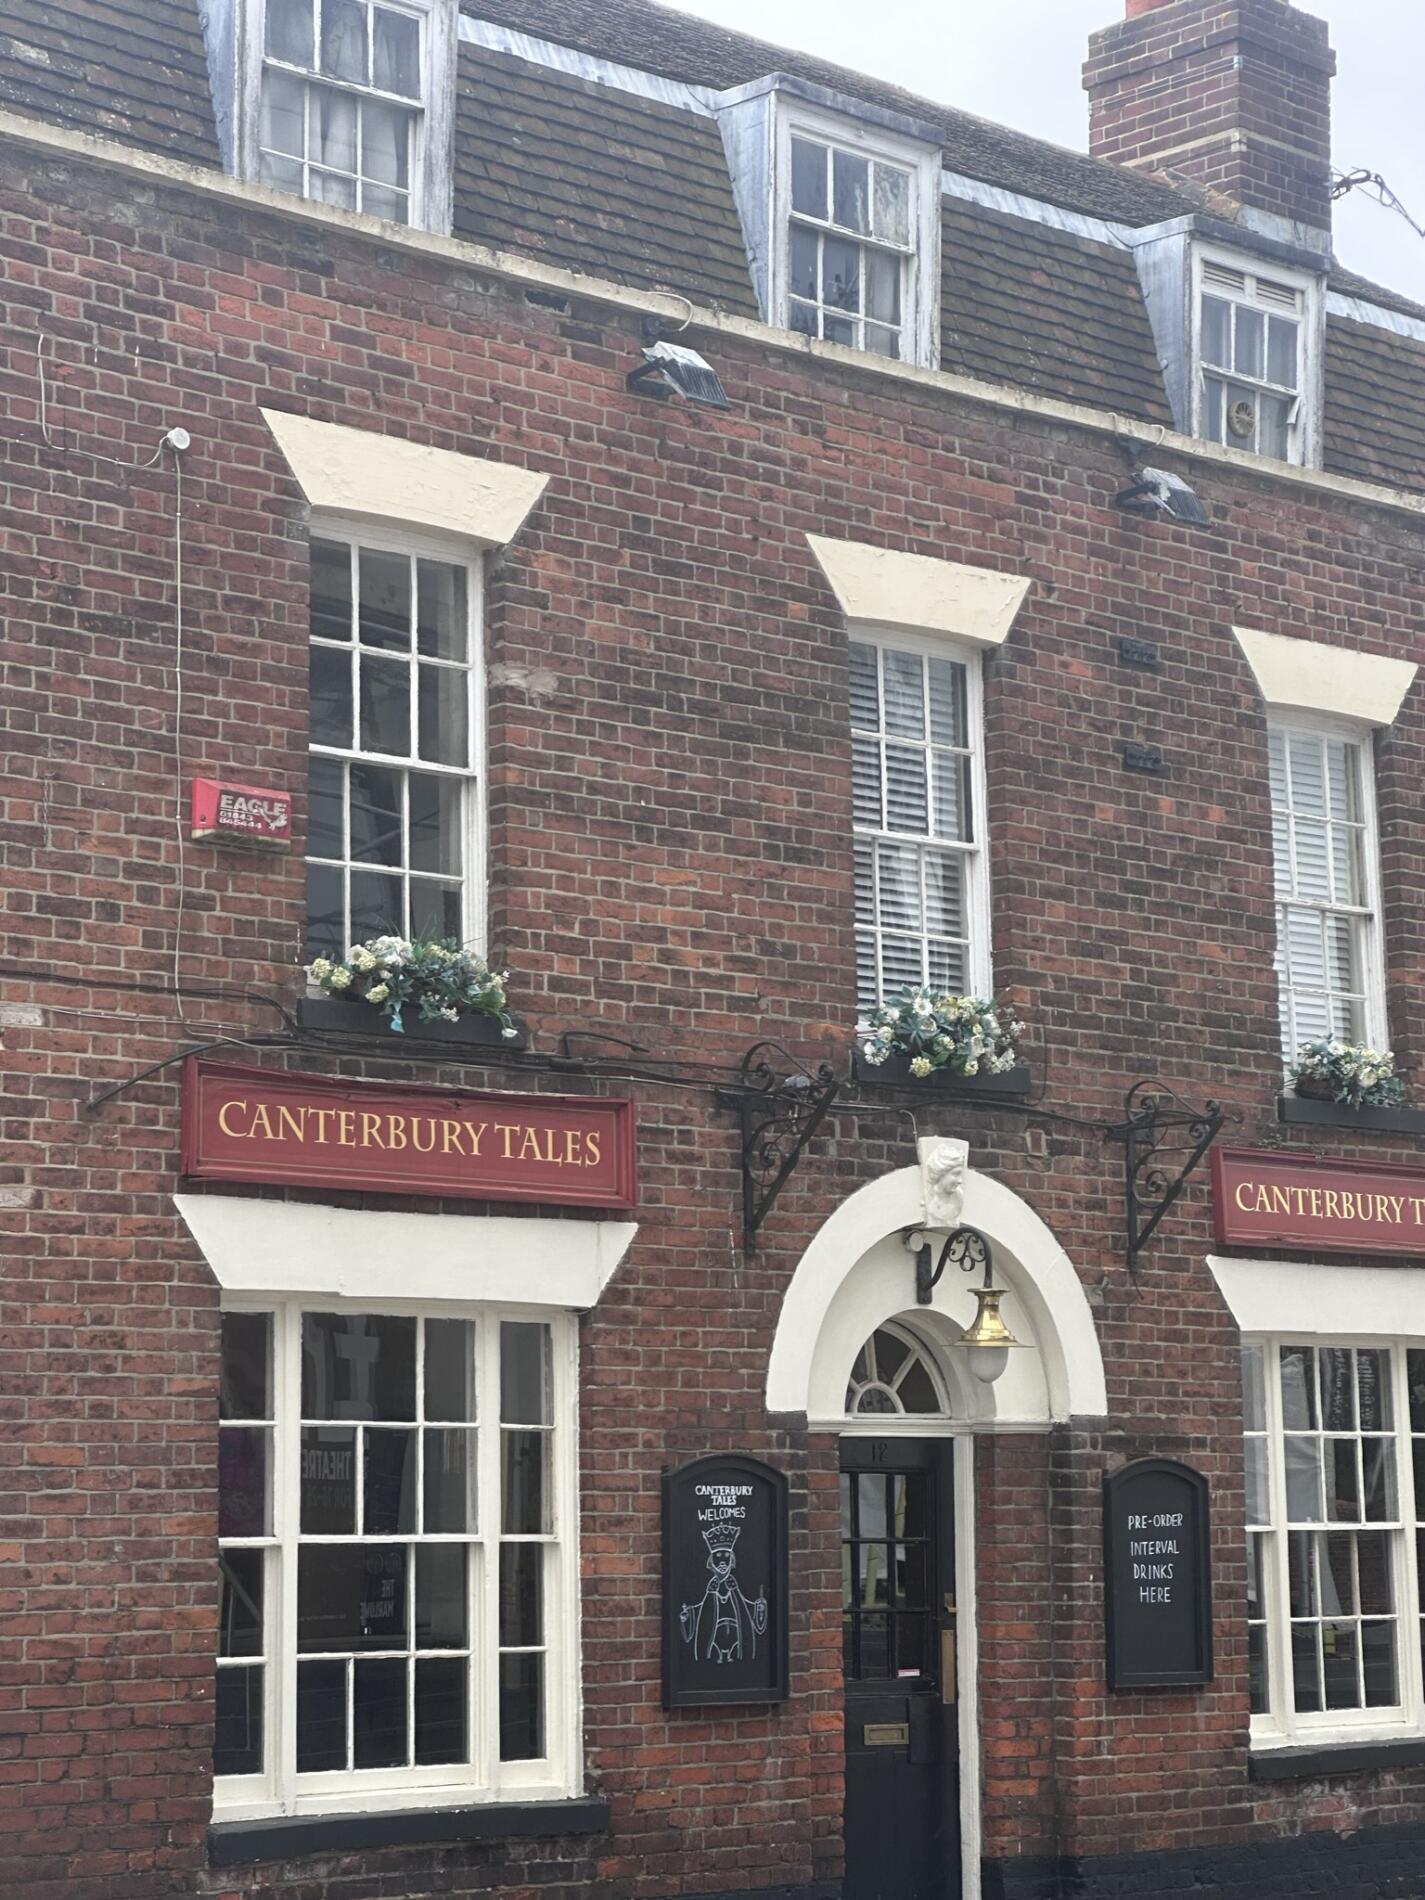 FUN FACT: The horse verb "to canter" comes from Canterbury.